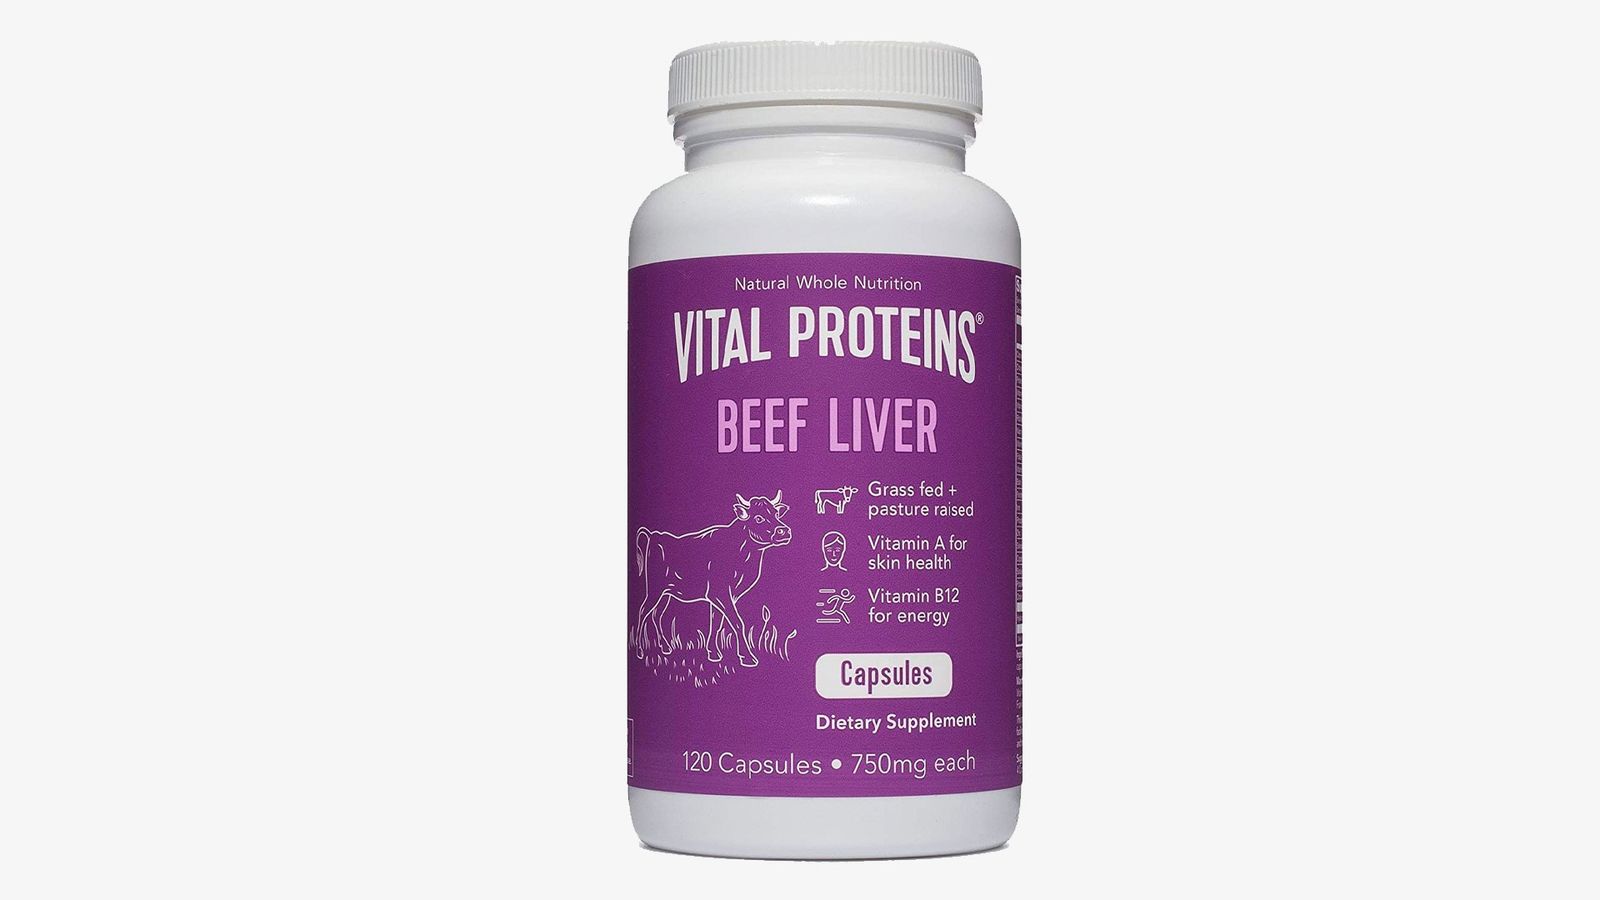 Vital Proteins Grass-Fed Desiccated Beef Liver Capsules product image of a white container with purple branding.